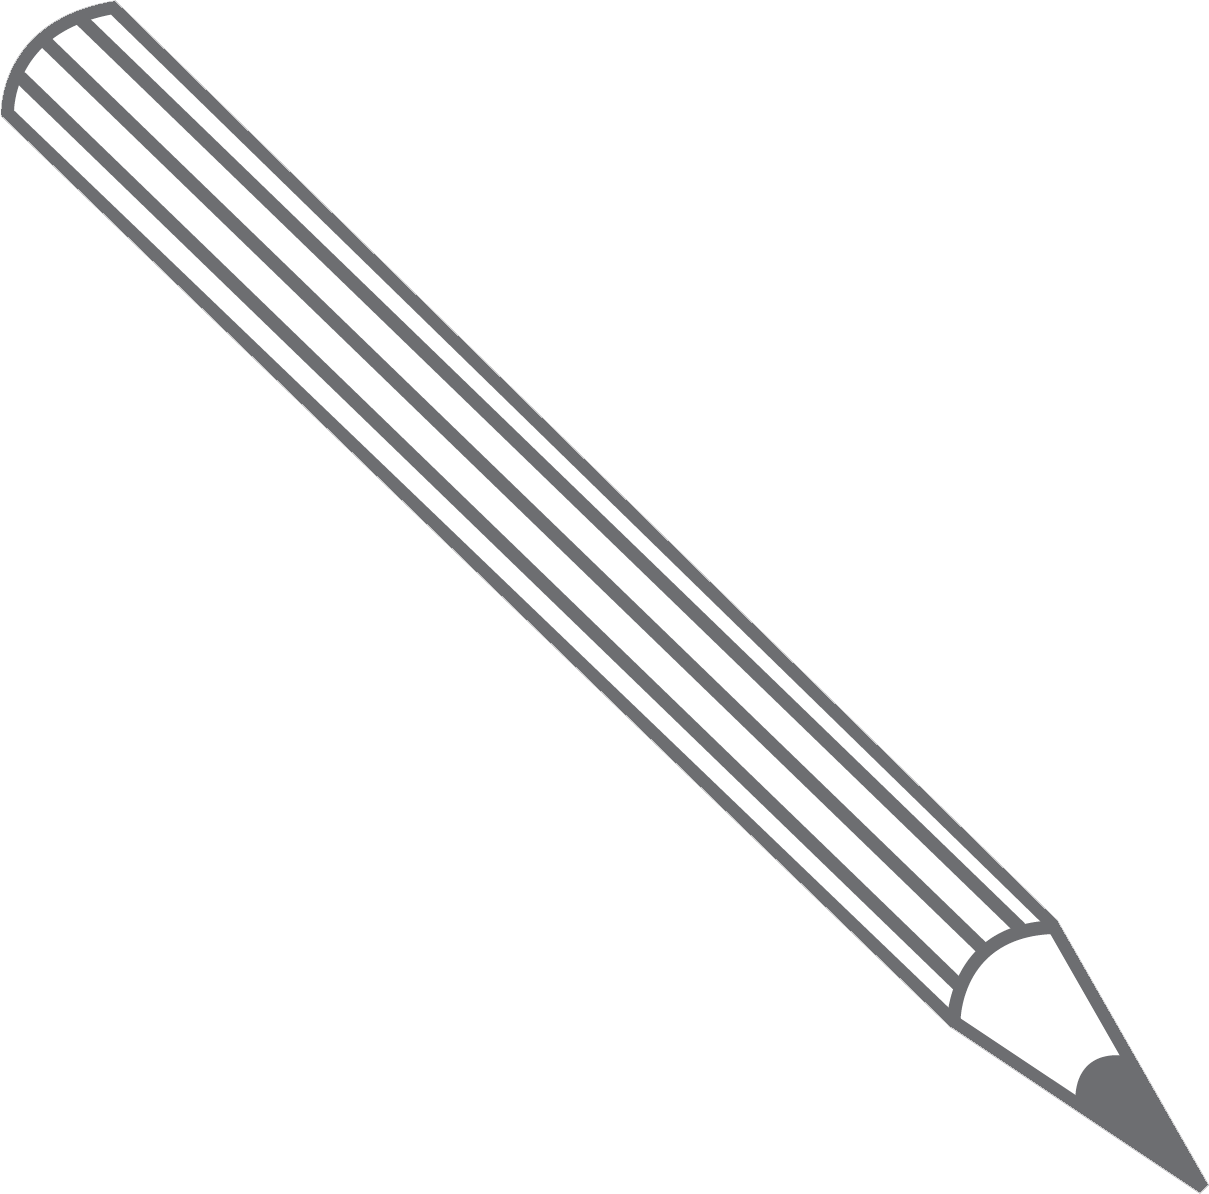 A drawing of a pencil